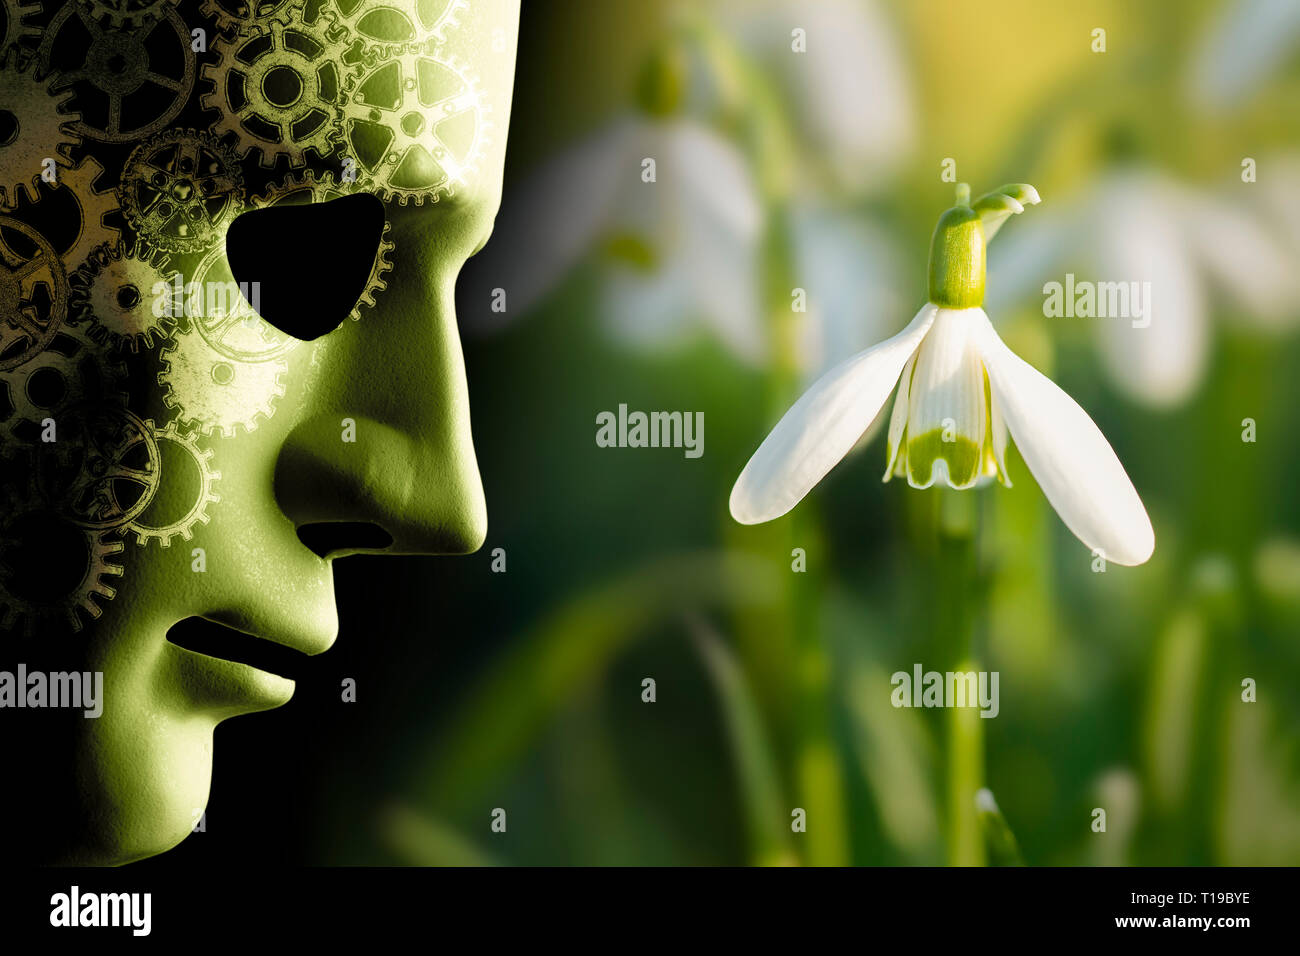 Working in harmony with nature concept with robotic face mask and brain cogs next to a delicate snowdrop flower in the garden Stock Photo